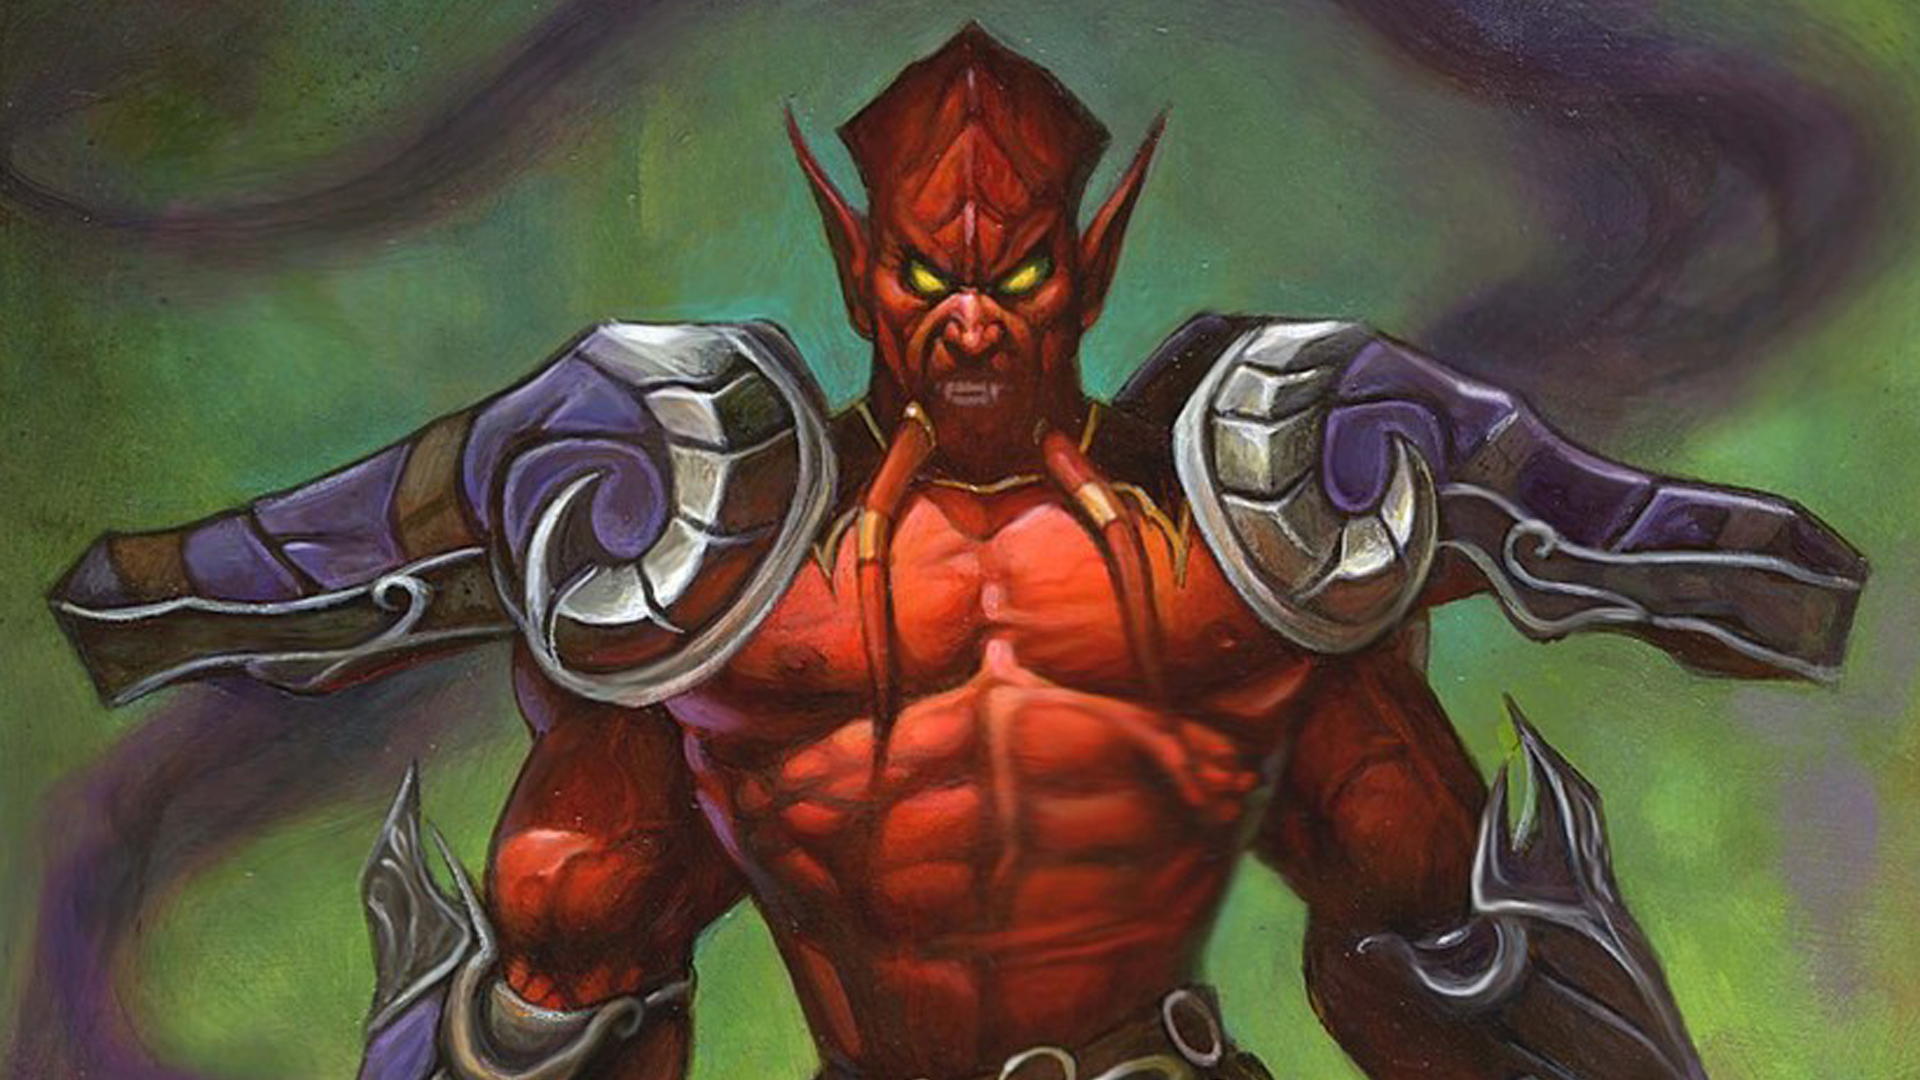  Lord Jaraxxus will be joining Hearthstone's Core Set as a Hero card 